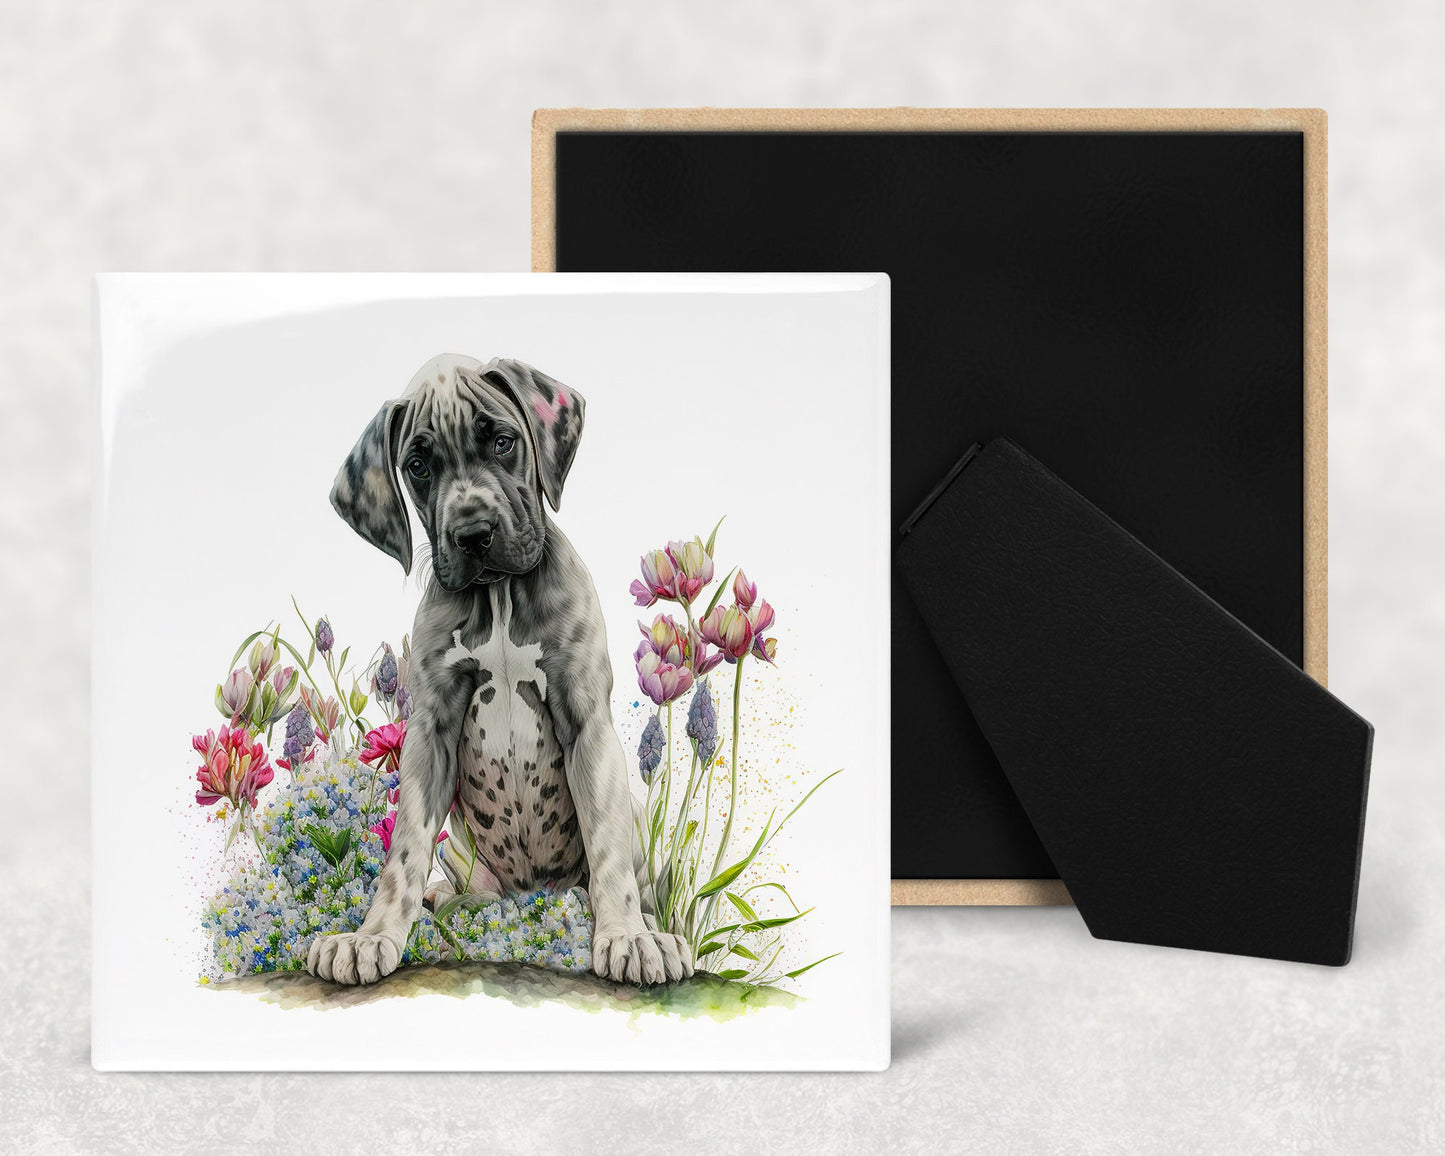 Cute Great Dane Puppy Art Decorative Ceramic Tile Set with Optional Easel Back - Available in 4 sizes - Set of 4